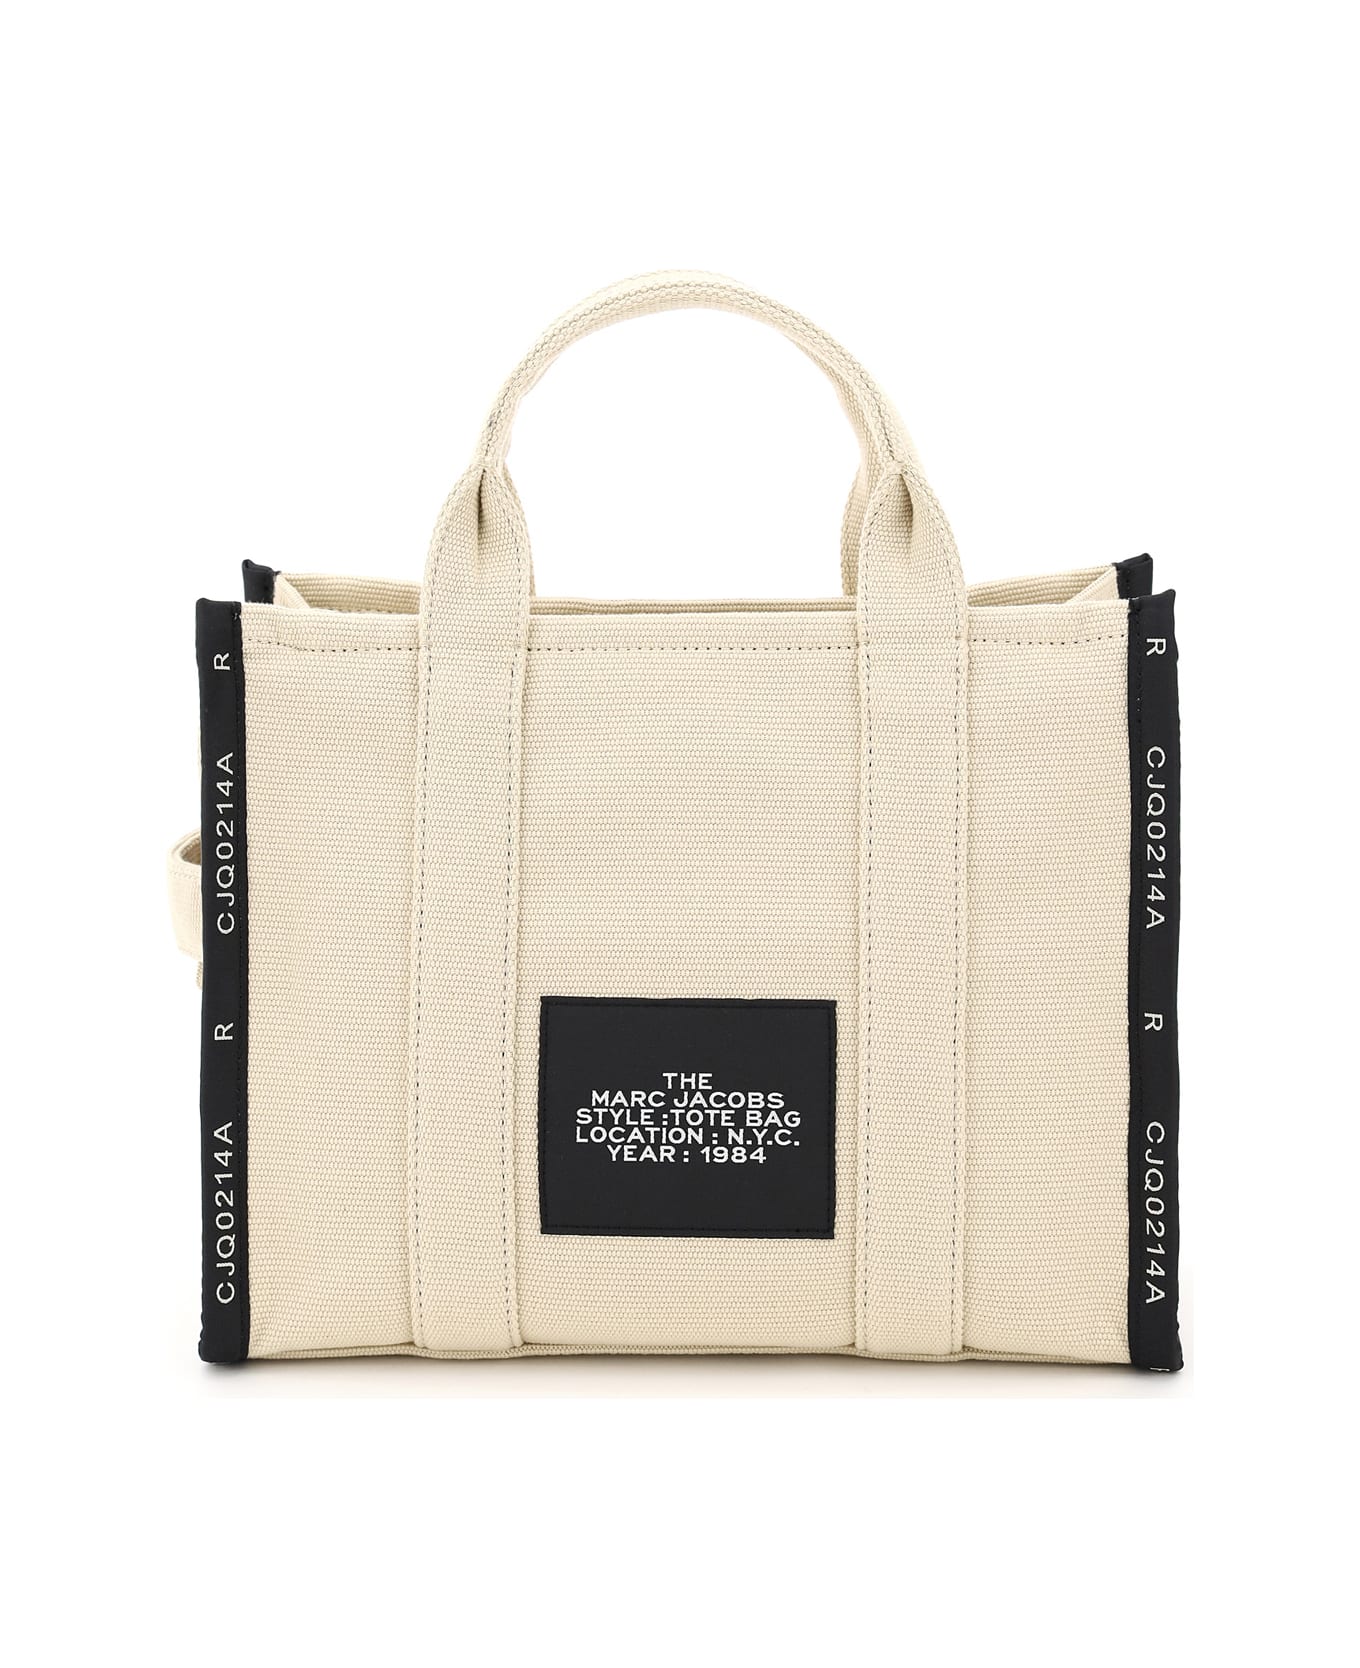 Marc Jacobs The Jacquard Traveler Tote Bag Small - Beige